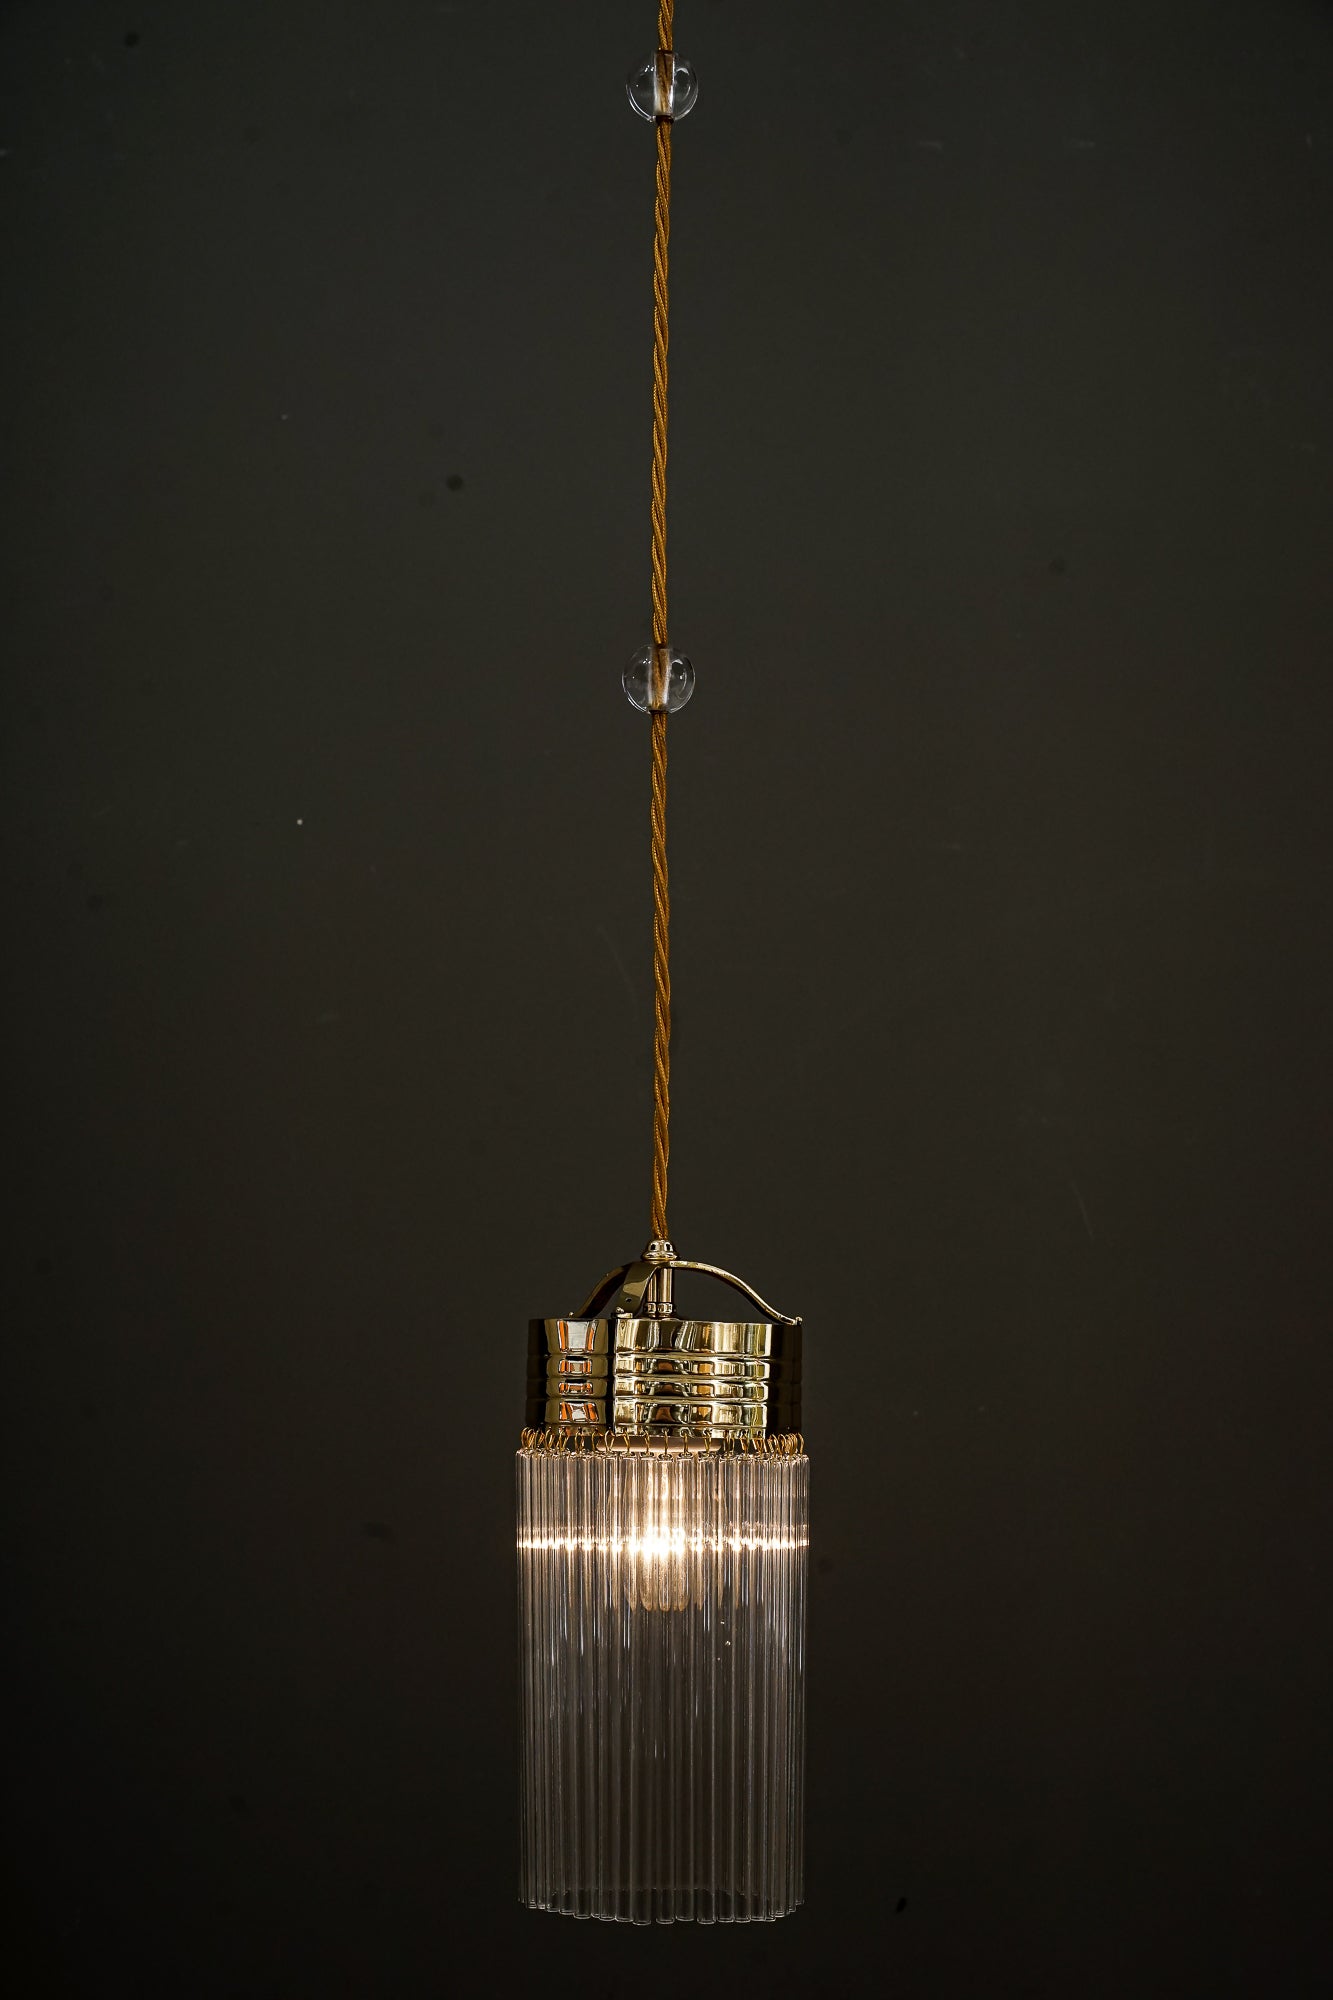 Art Deco pendant with glass sticks vienna around 1920s
Polished and stove enameled
Glass sticks are replaced ( new )